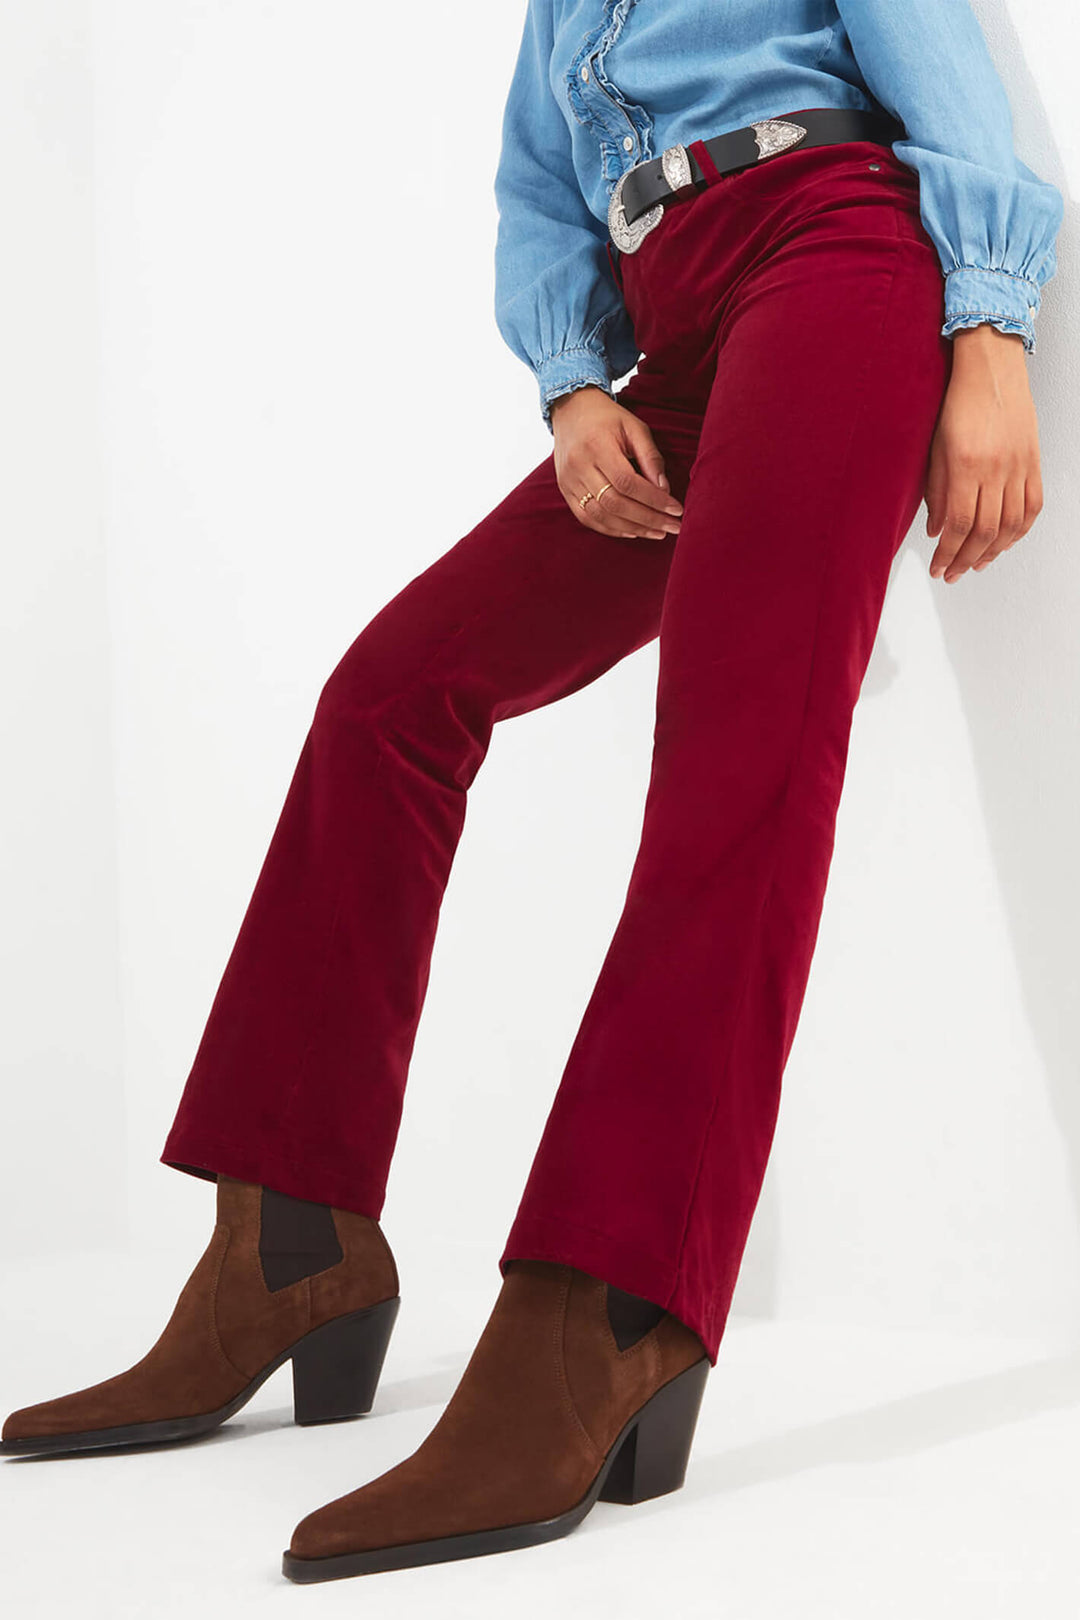 Joe Browns WB328 Berry Red Must Have Moleskin Bootcut Trousers - Experience Boutique